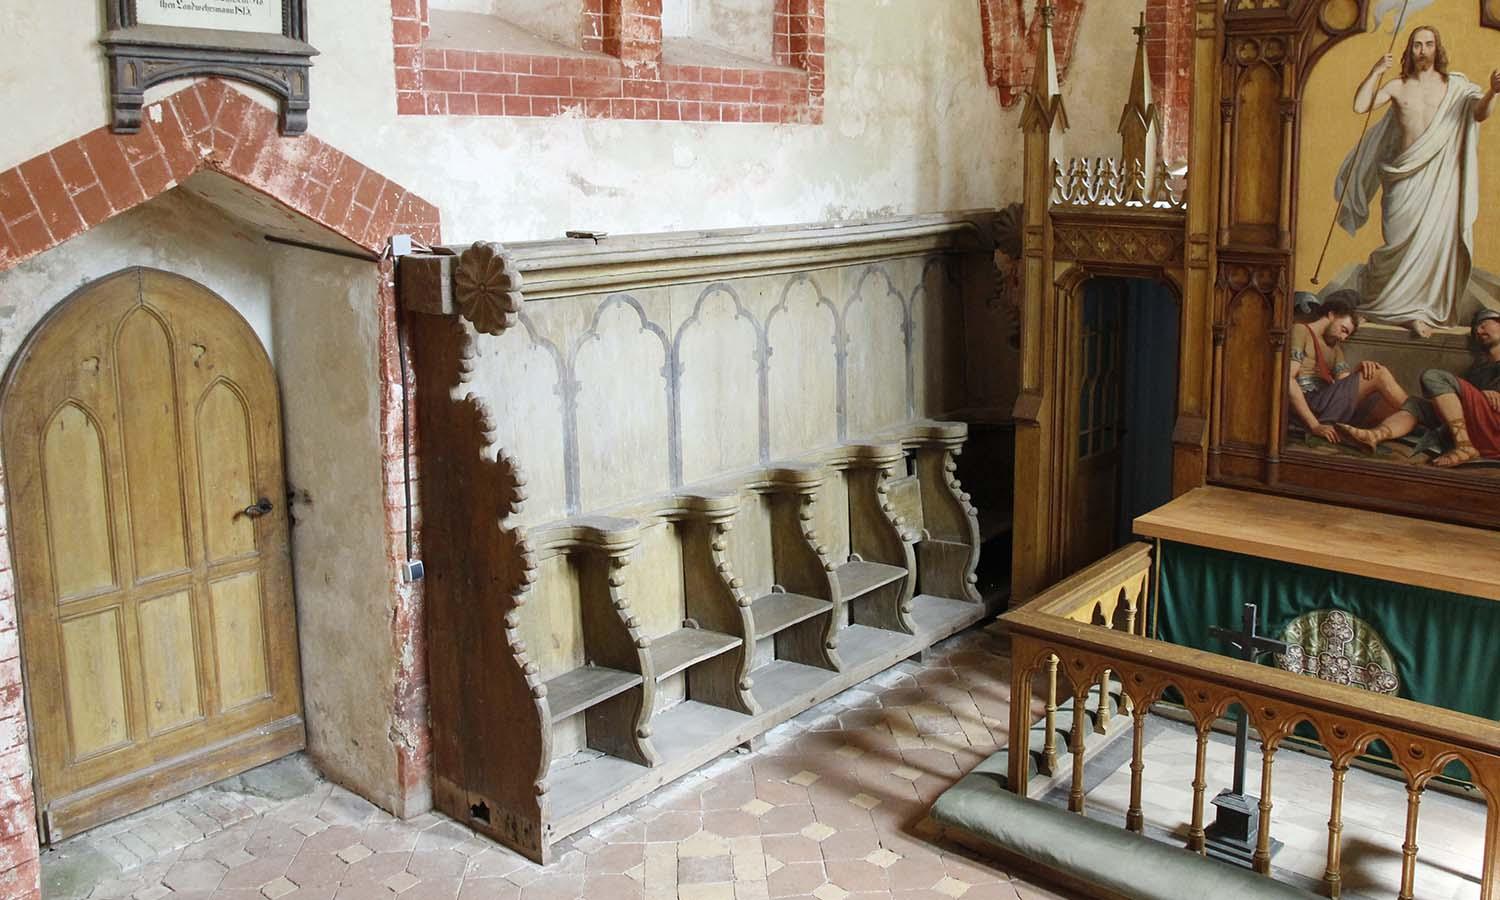 Photo of the wooden stall of the church in Gängelow